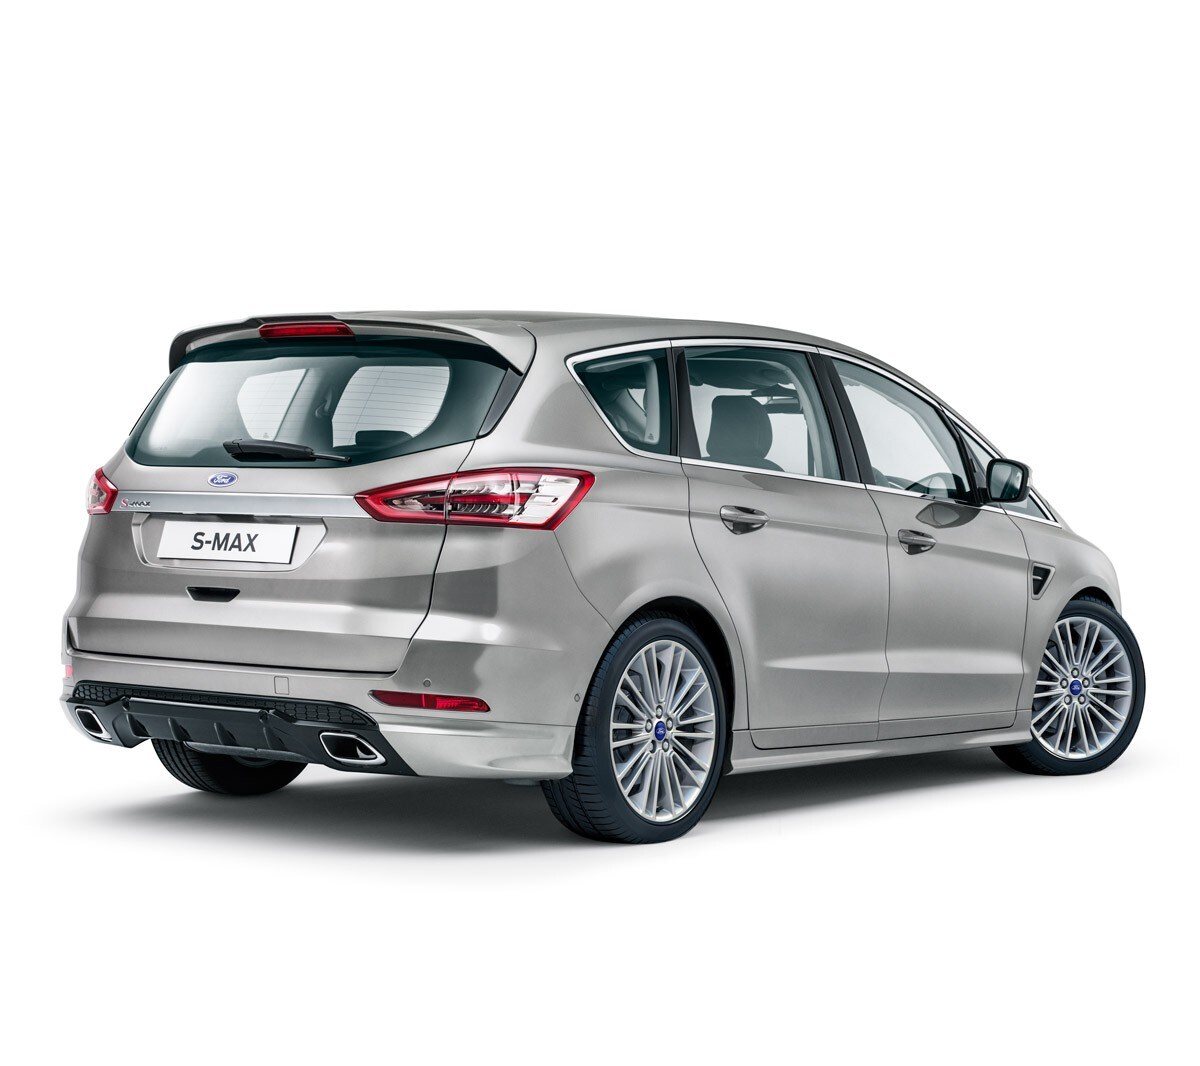 Ford-S-MAX Full body styling kit with rear diffuser and optional roof spoiler